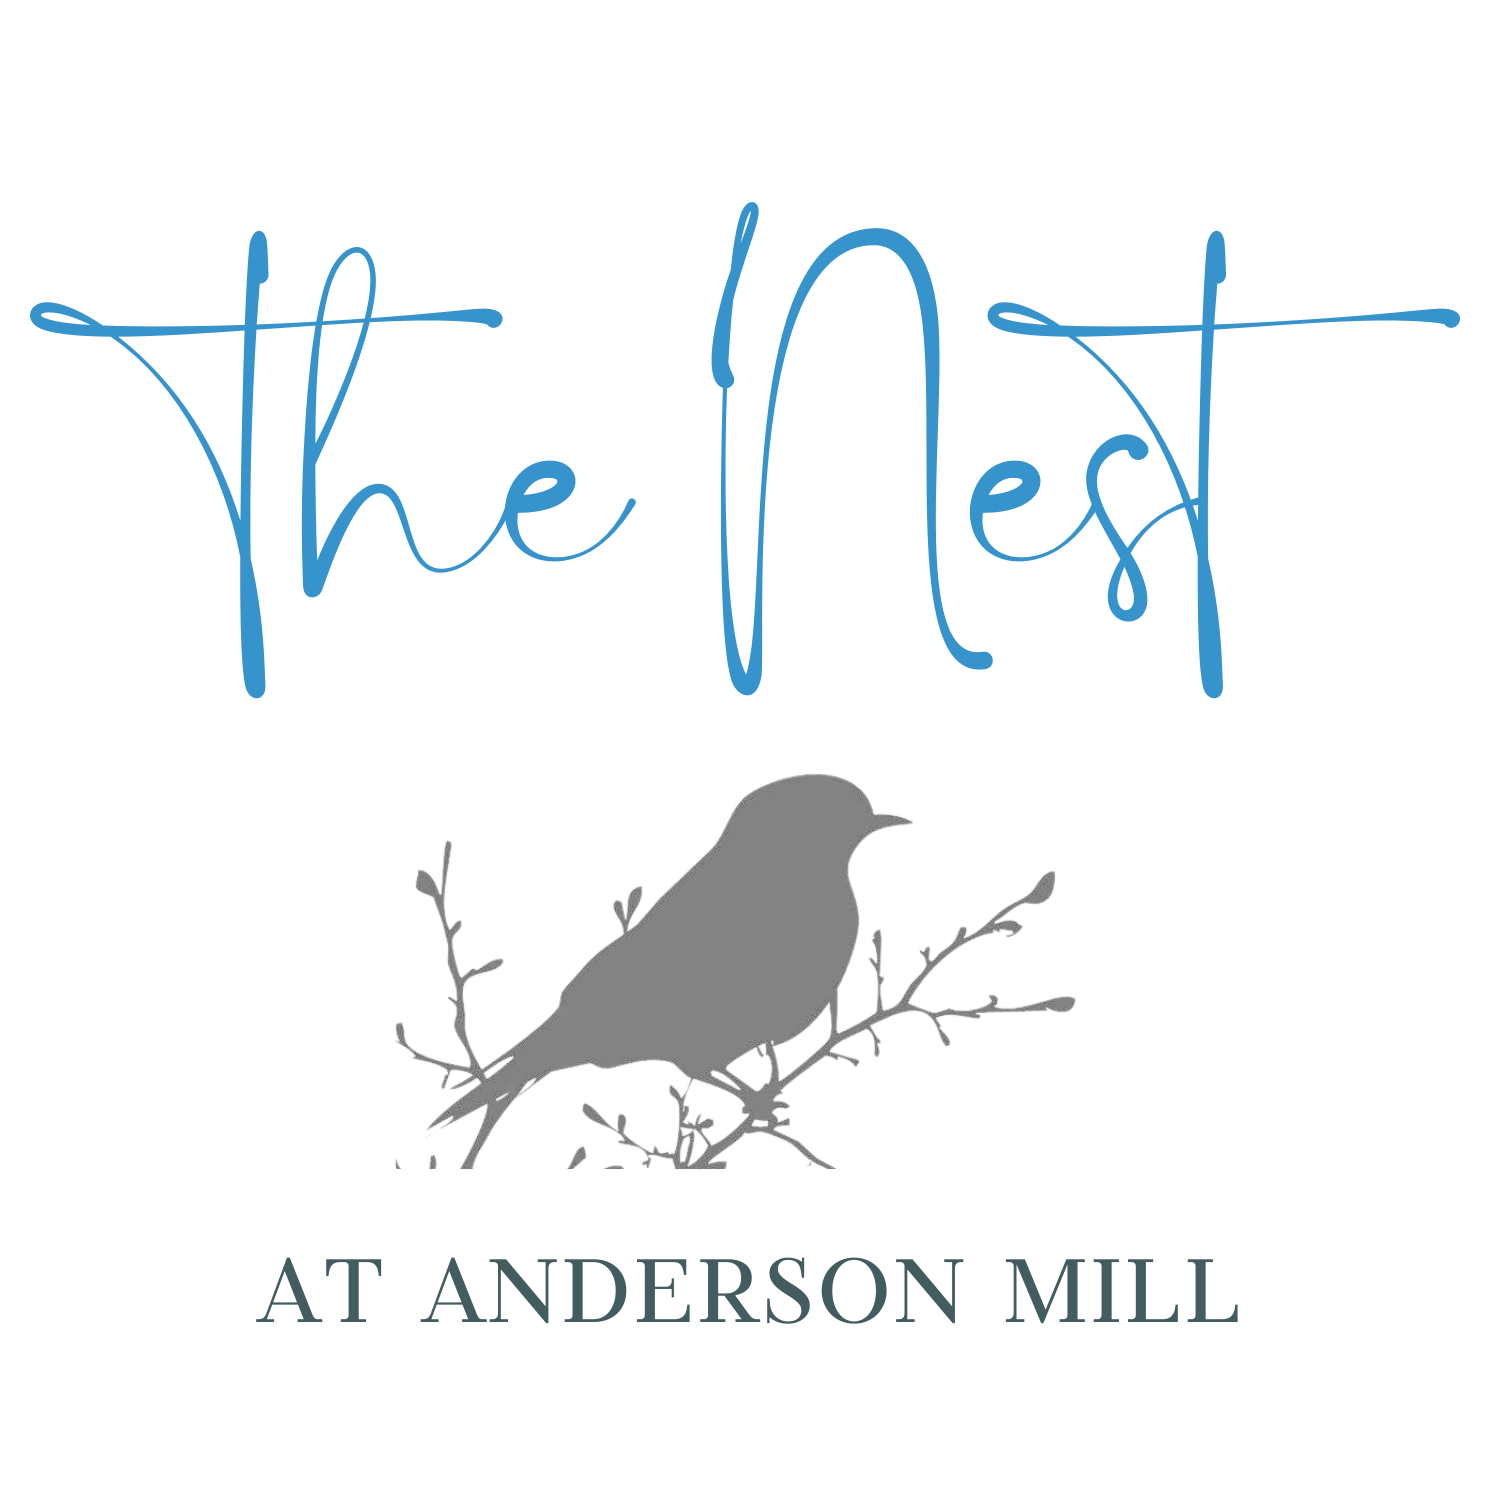 The Nest at Anderson Mill